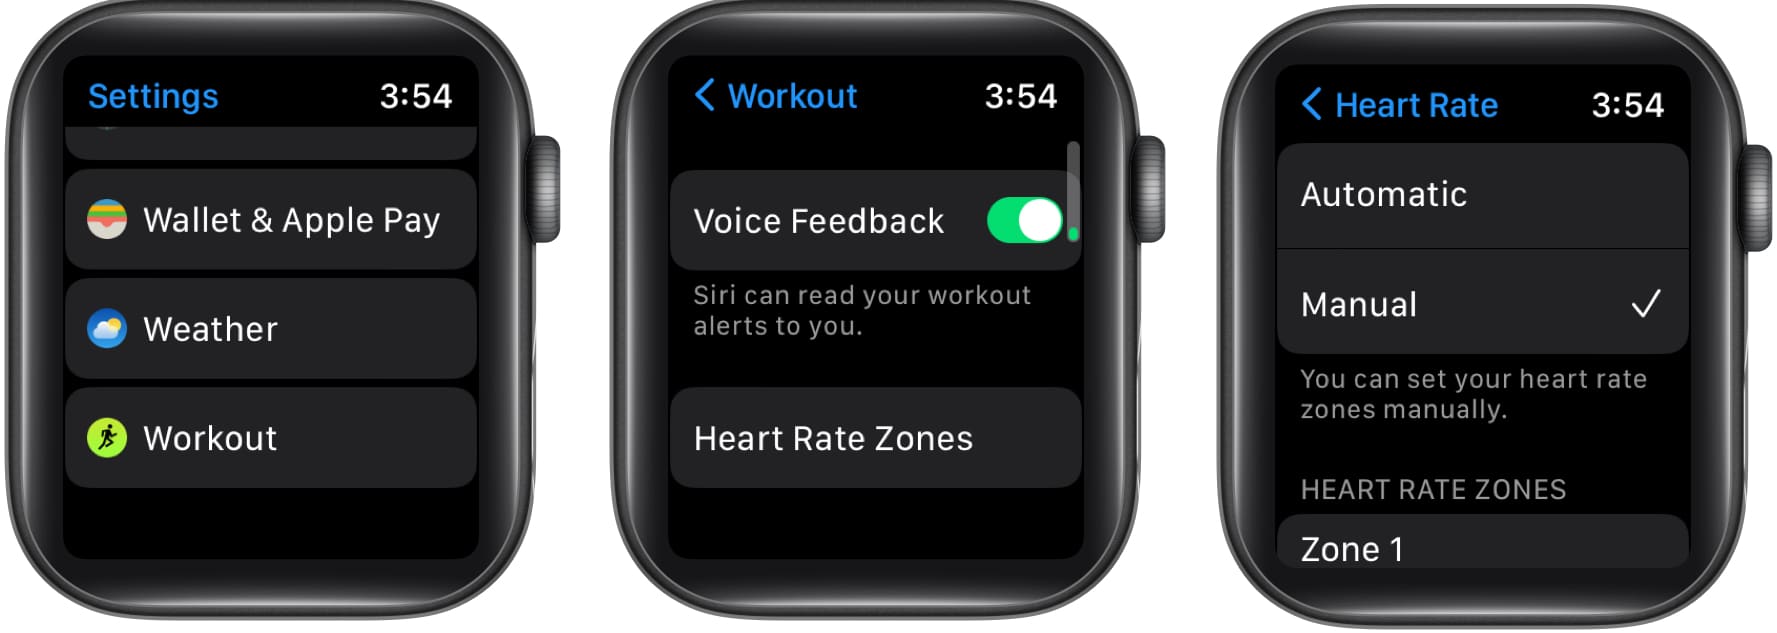 How to use Heart Rate Zone tracking on Apple Watch in watchOS 9 - 86